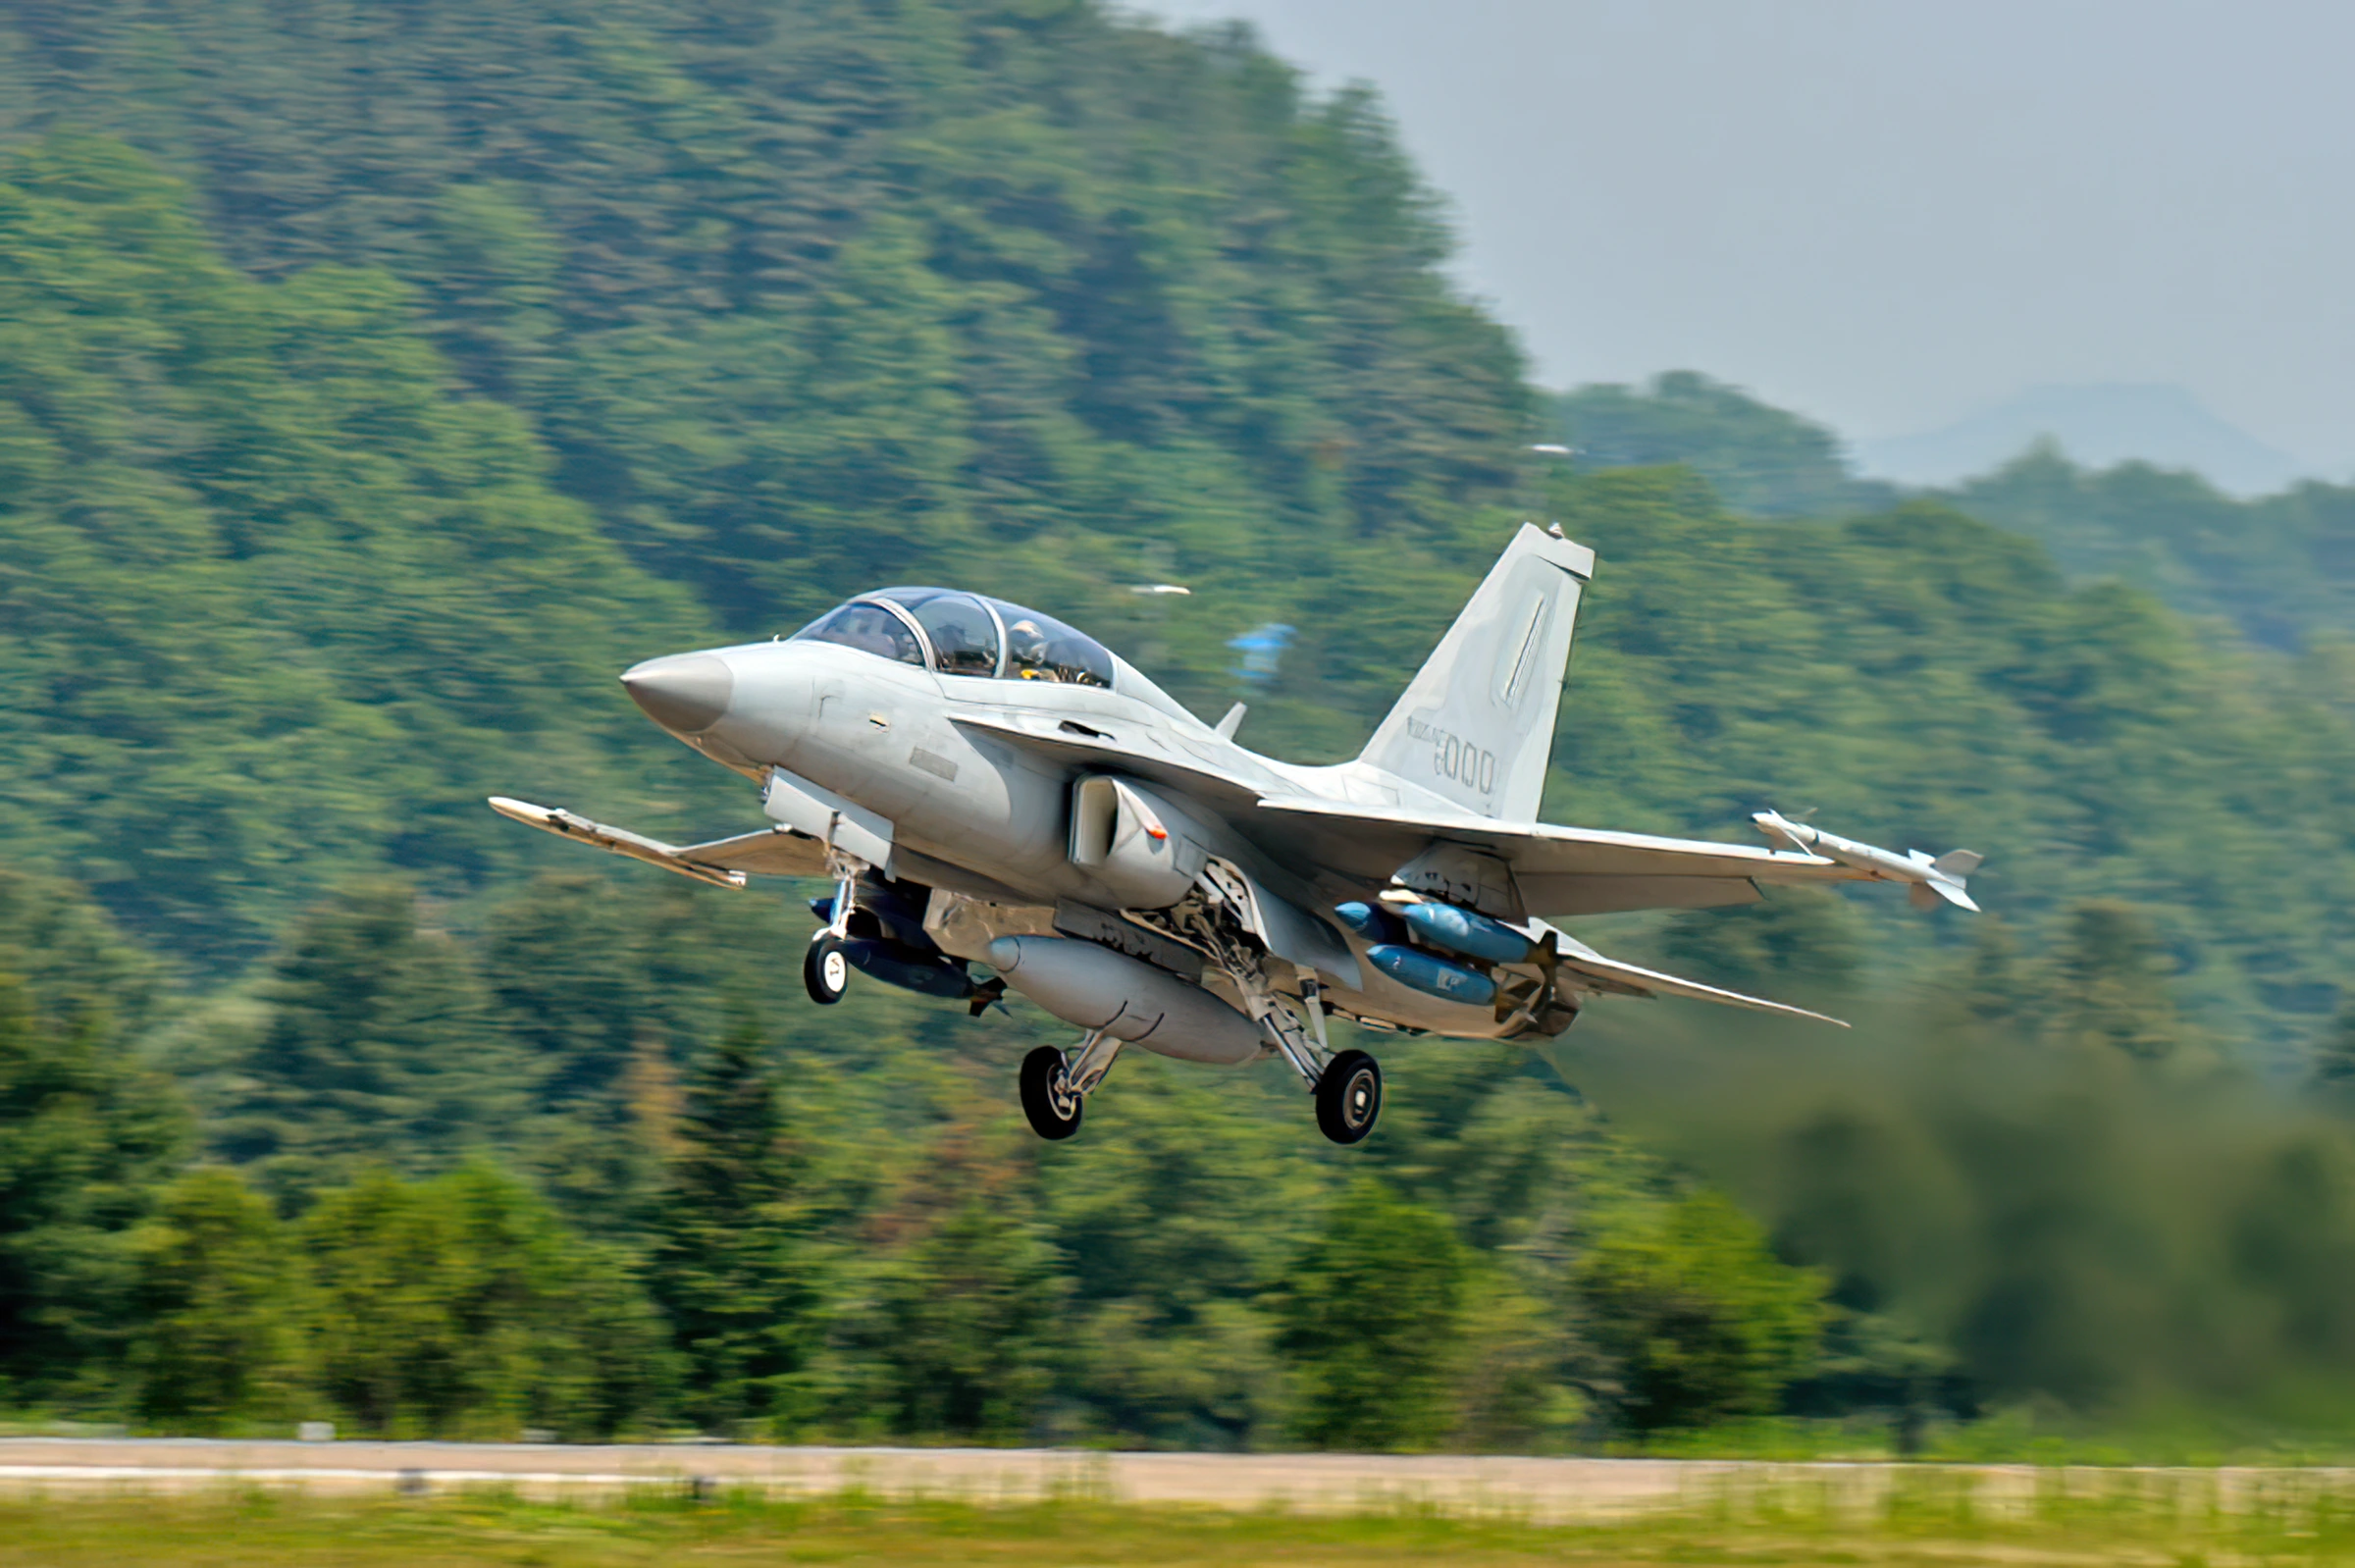 Malaysia bought 18 FA-50 aircraft from South Korea for 920 million